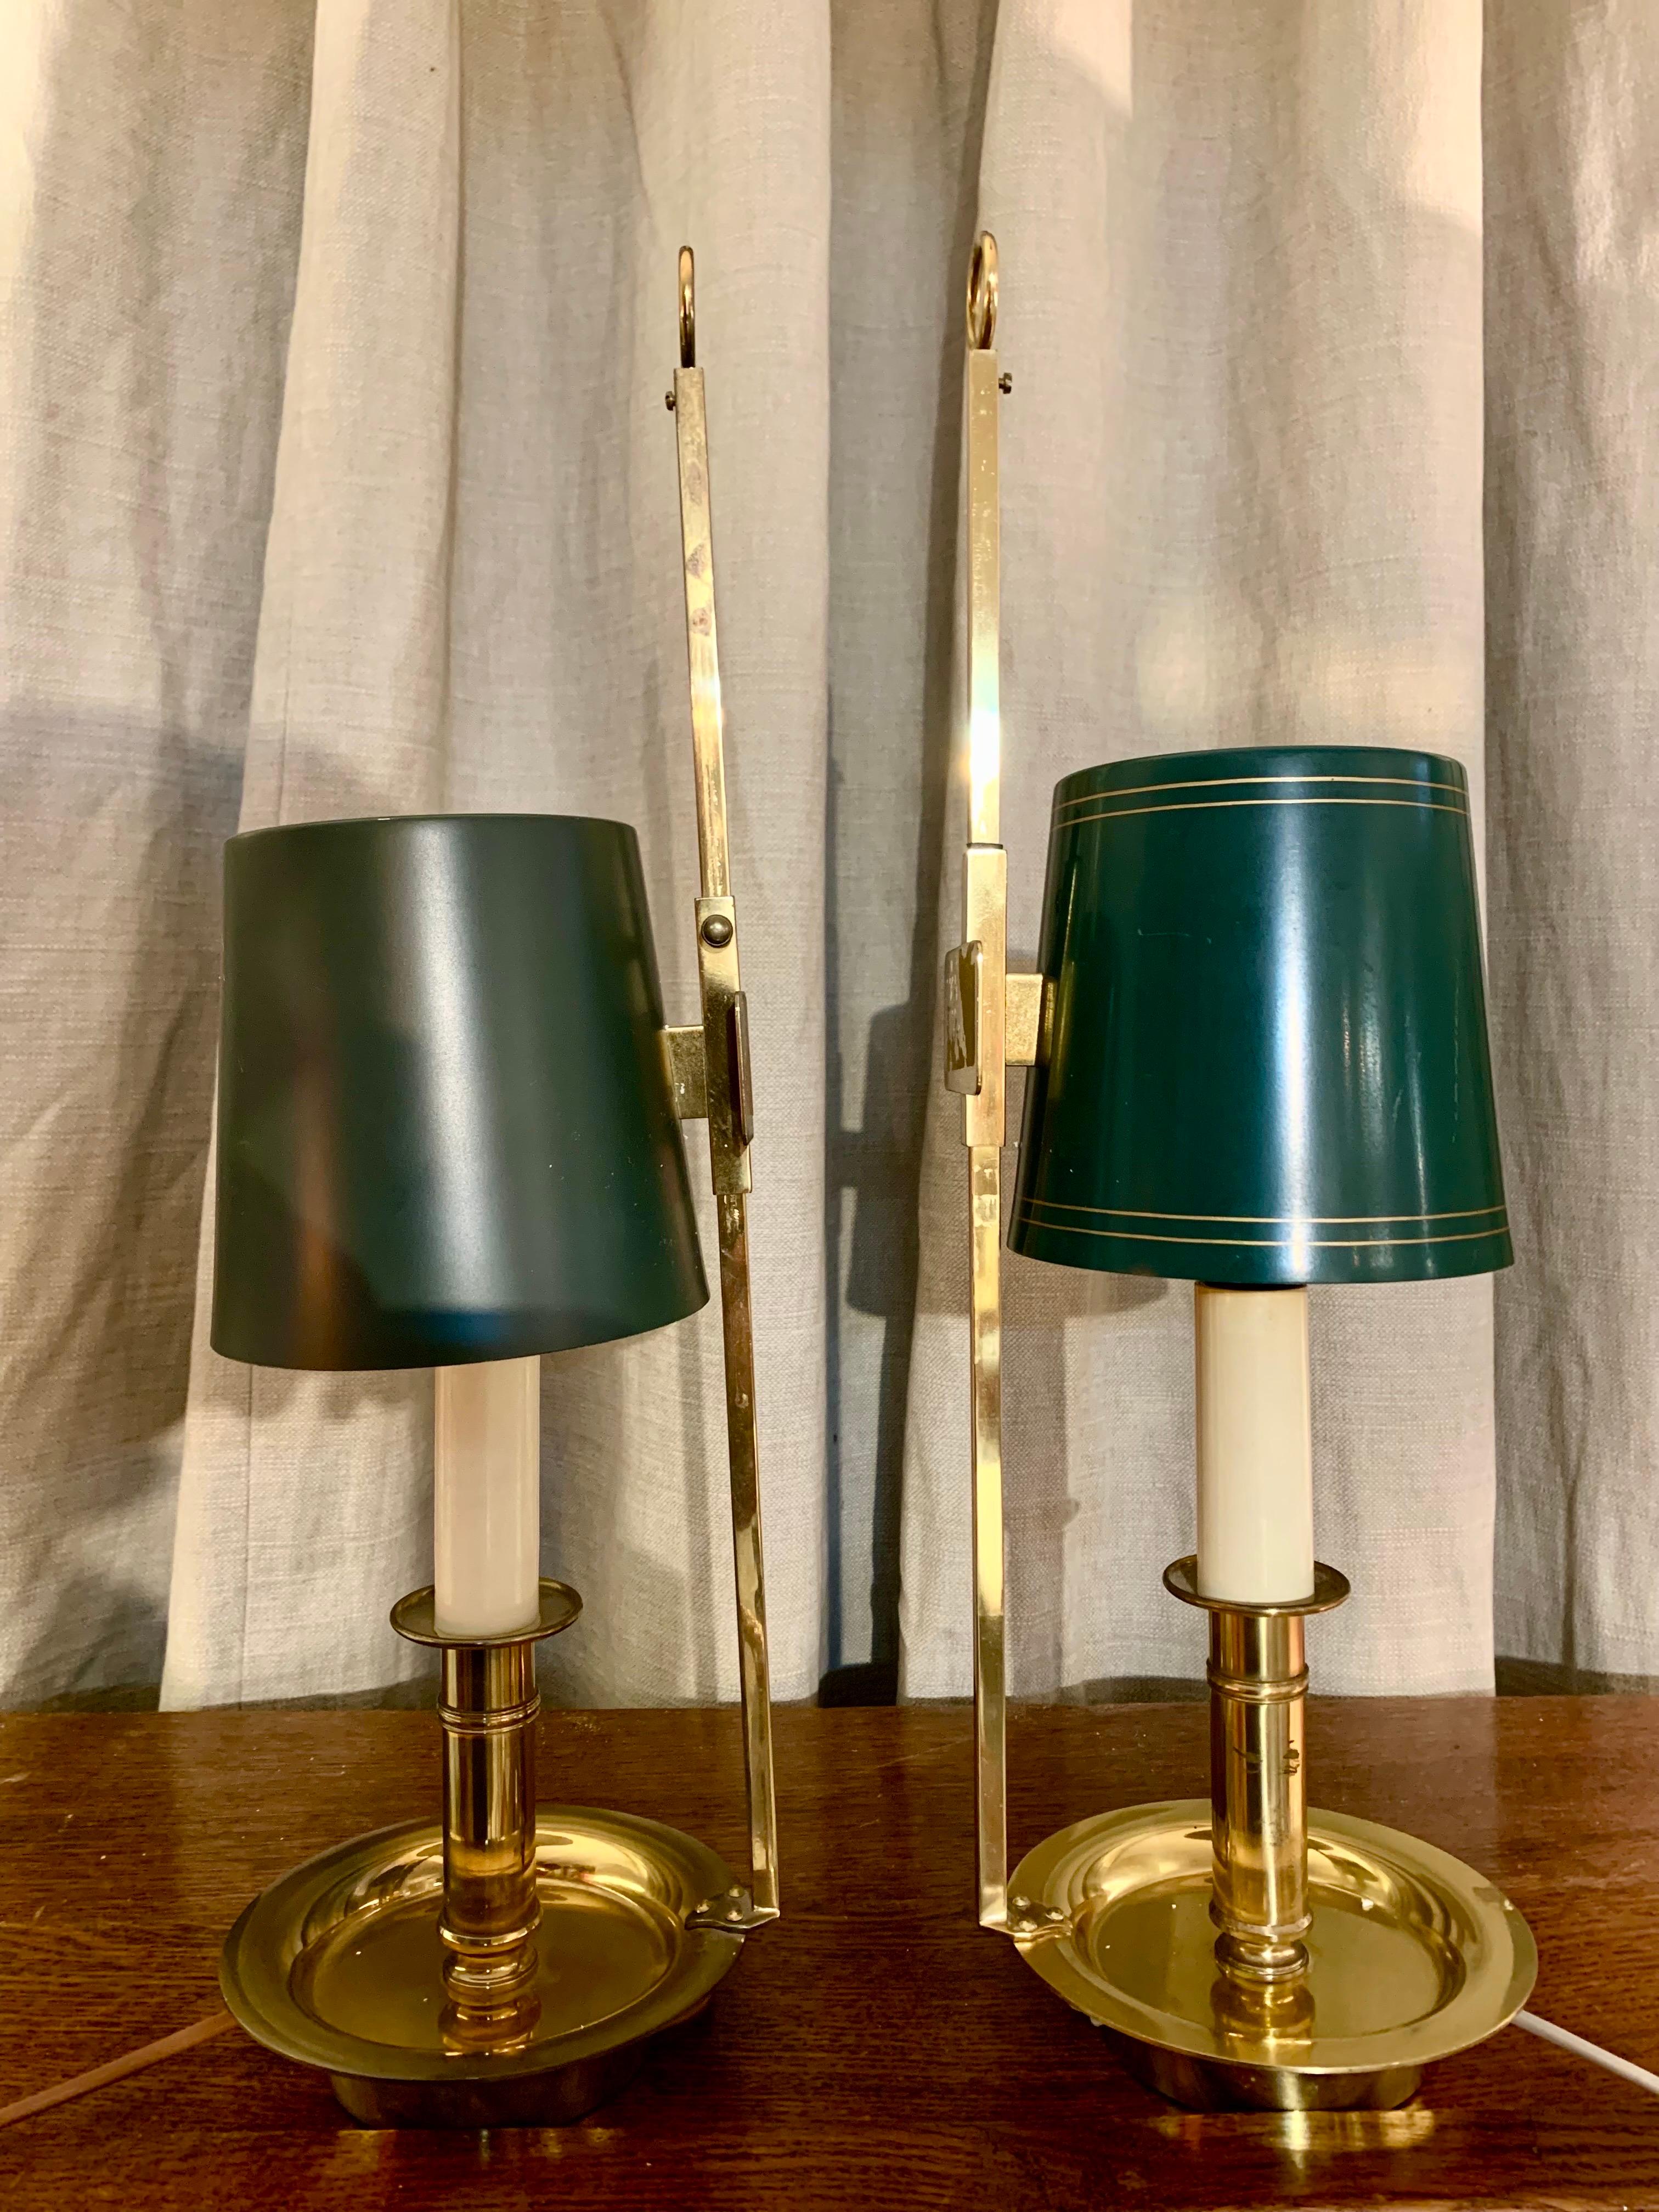 Apair of boullitte lamps, in gold brass and metal painted lampshades, can be used both to place them on a table and hang them on the wall as a wall sconces lamp.The height of the lampshade can be adjusted